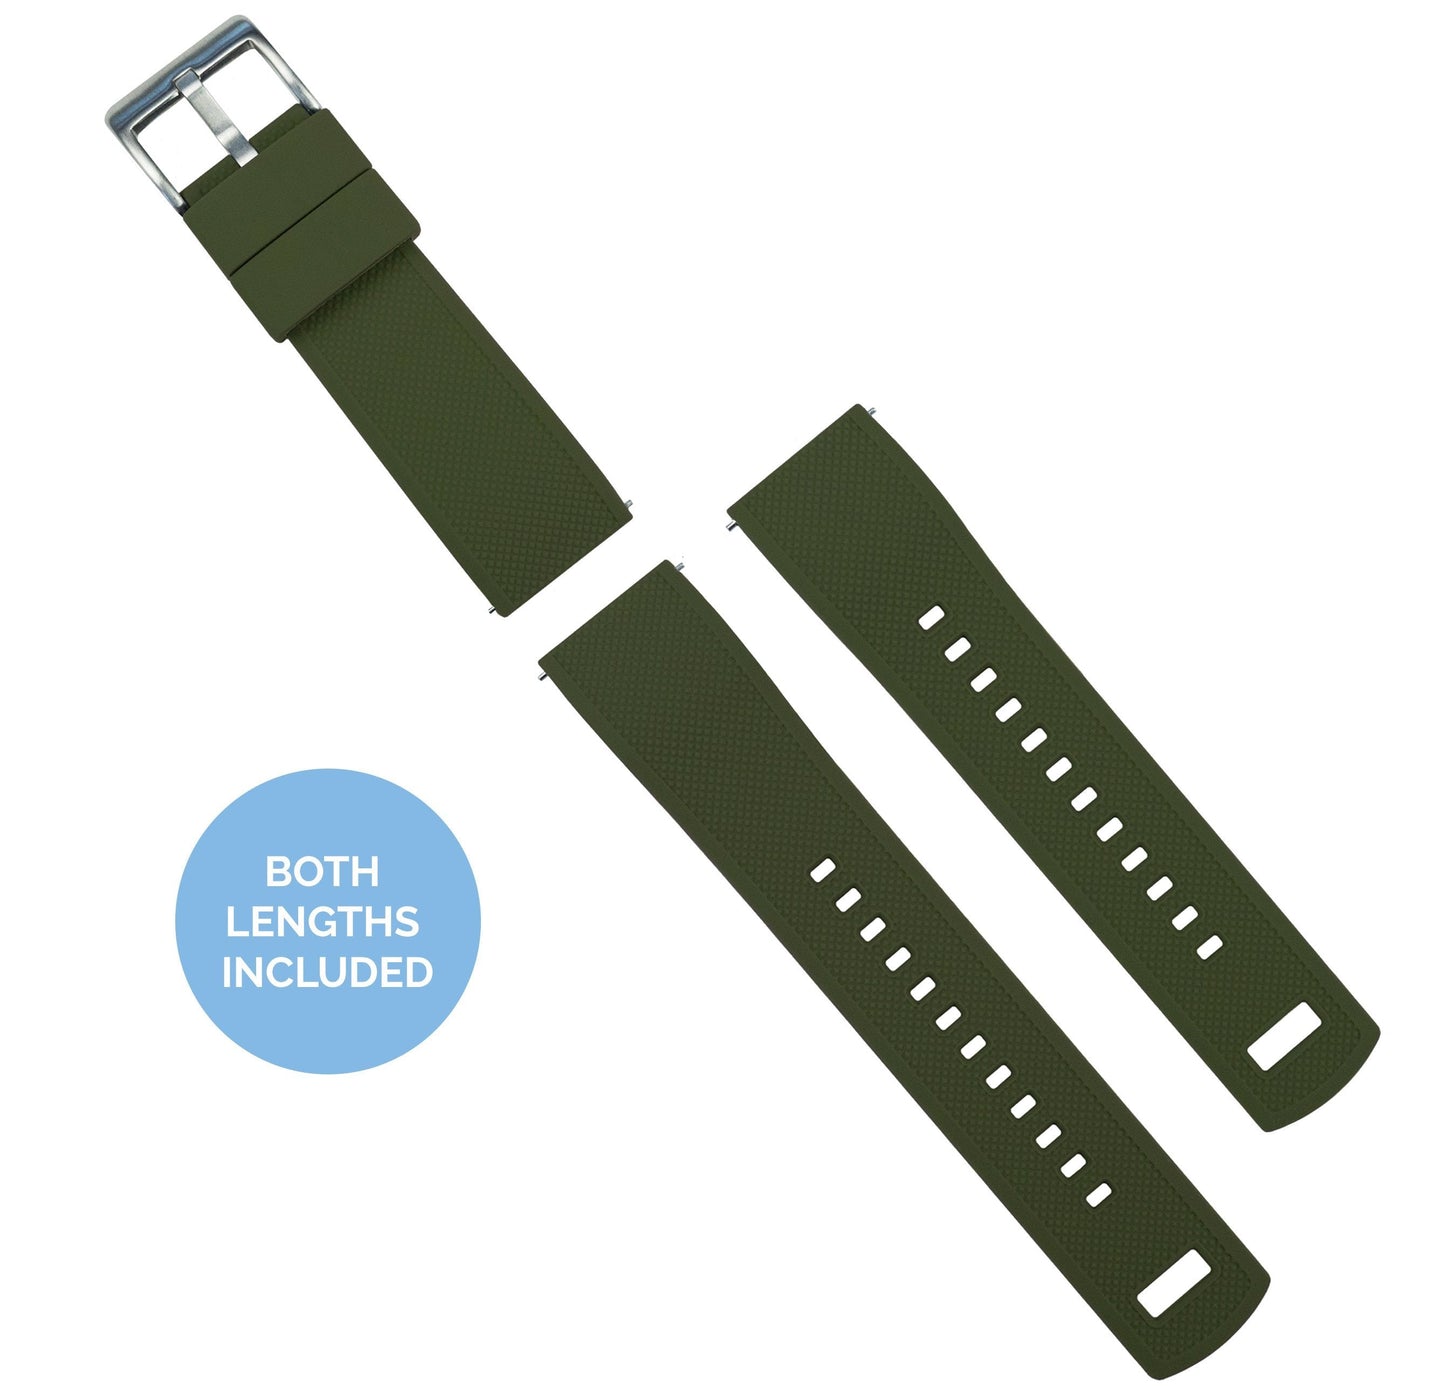 MOONSWATCH Bip | Elite Silicone | Army Green Top / Black Bottom - Barton Watch Bands